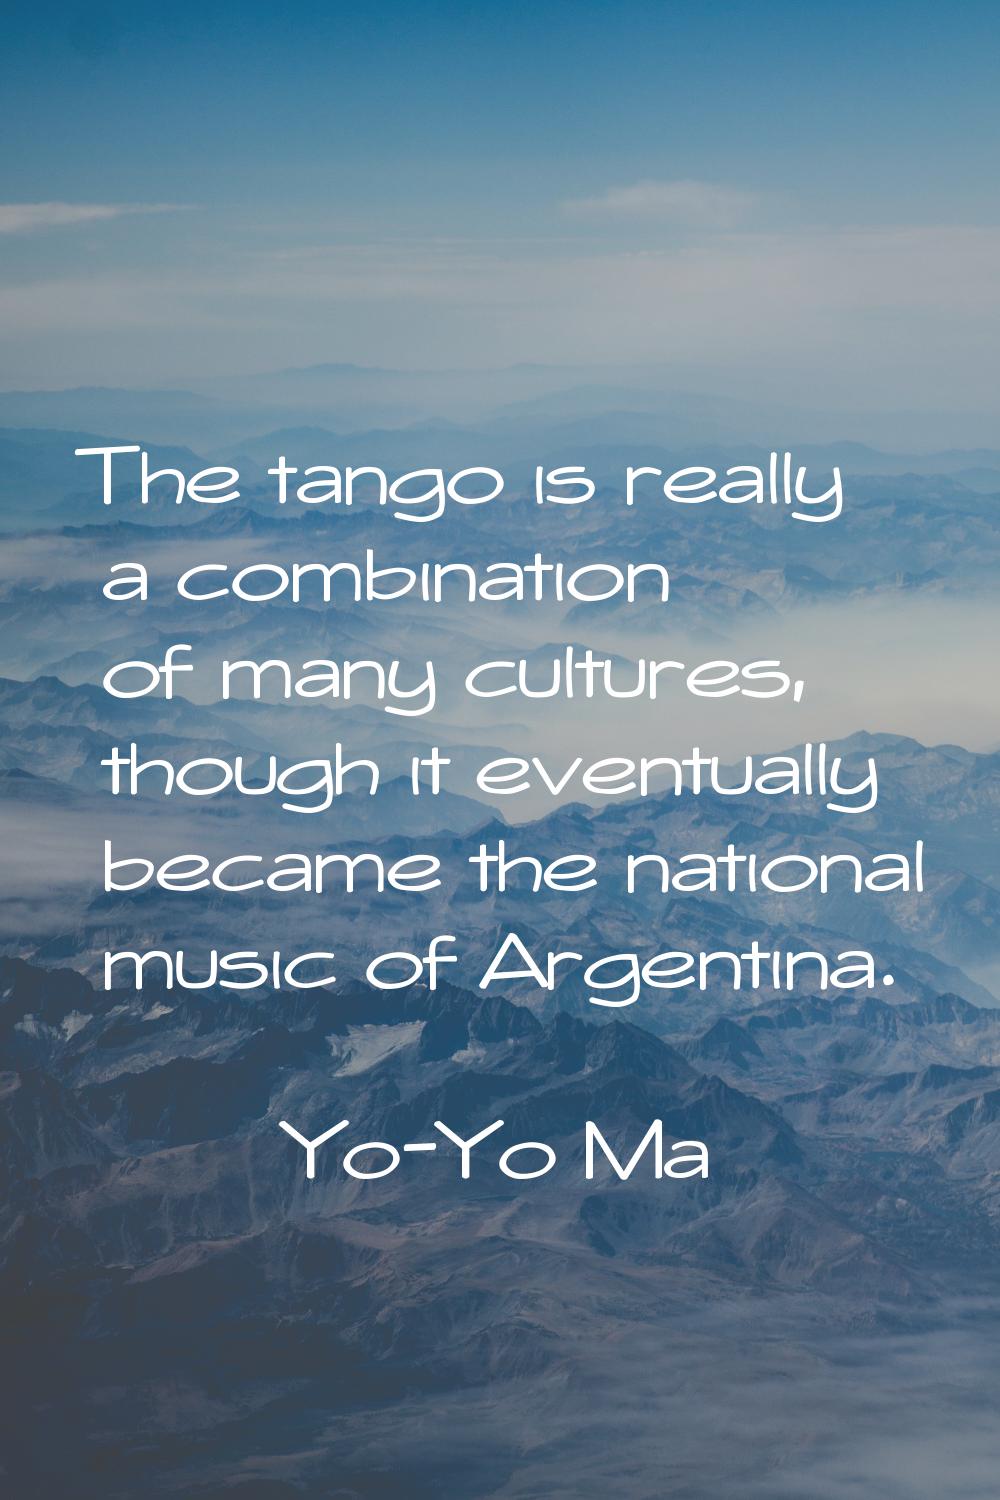 The tango is really a combination of many cultures, though it eventually became the national music 